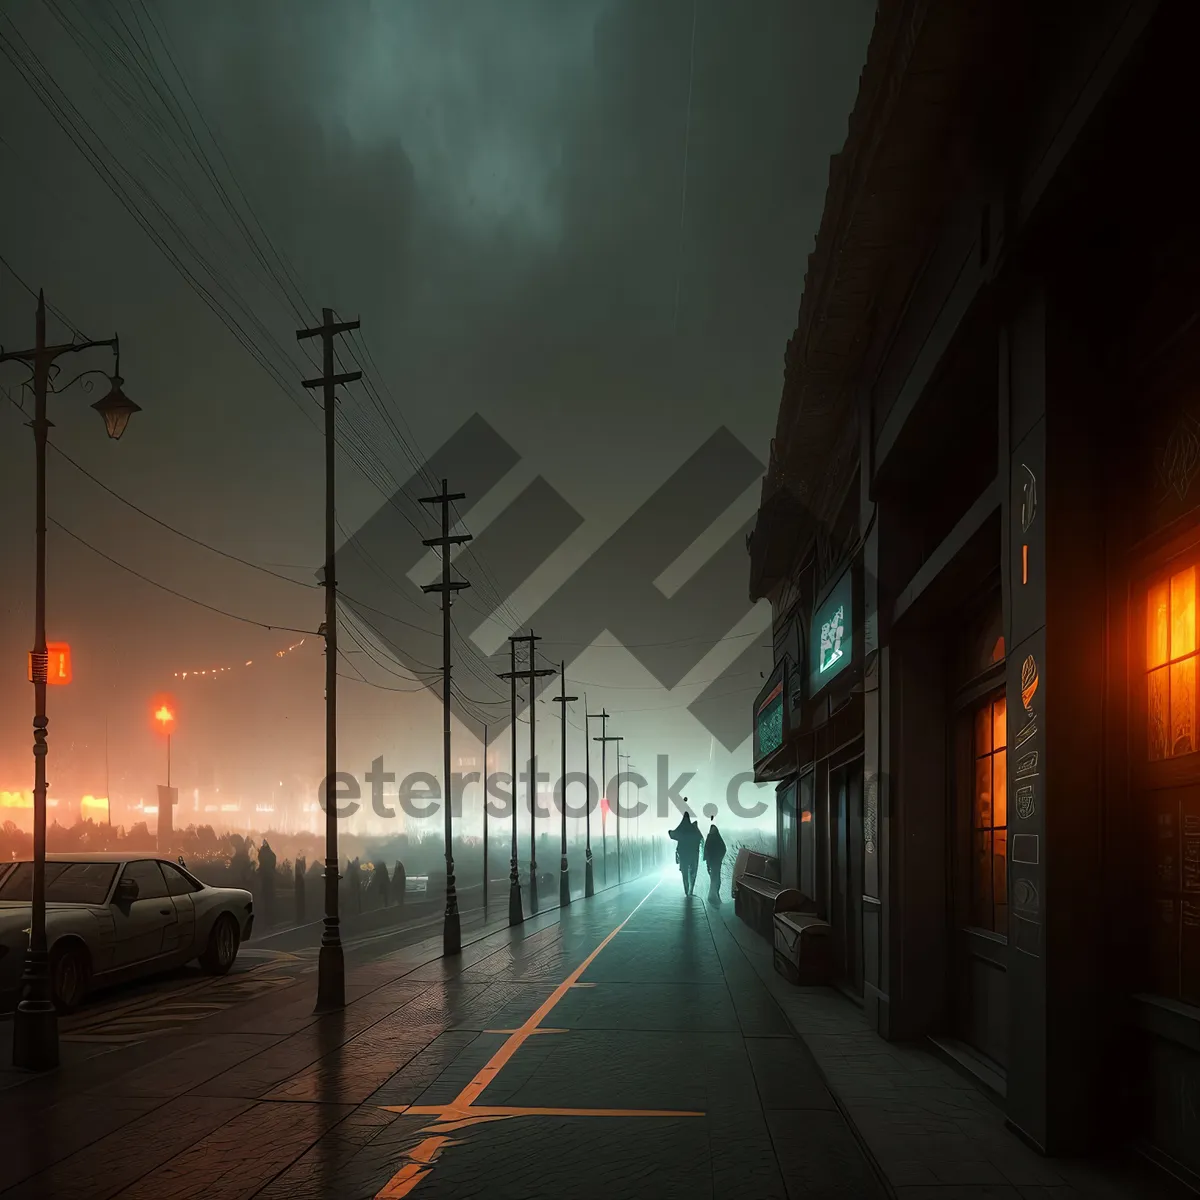 Picture of Cityscape Illuminated by Urban Street Lights and Semaphores